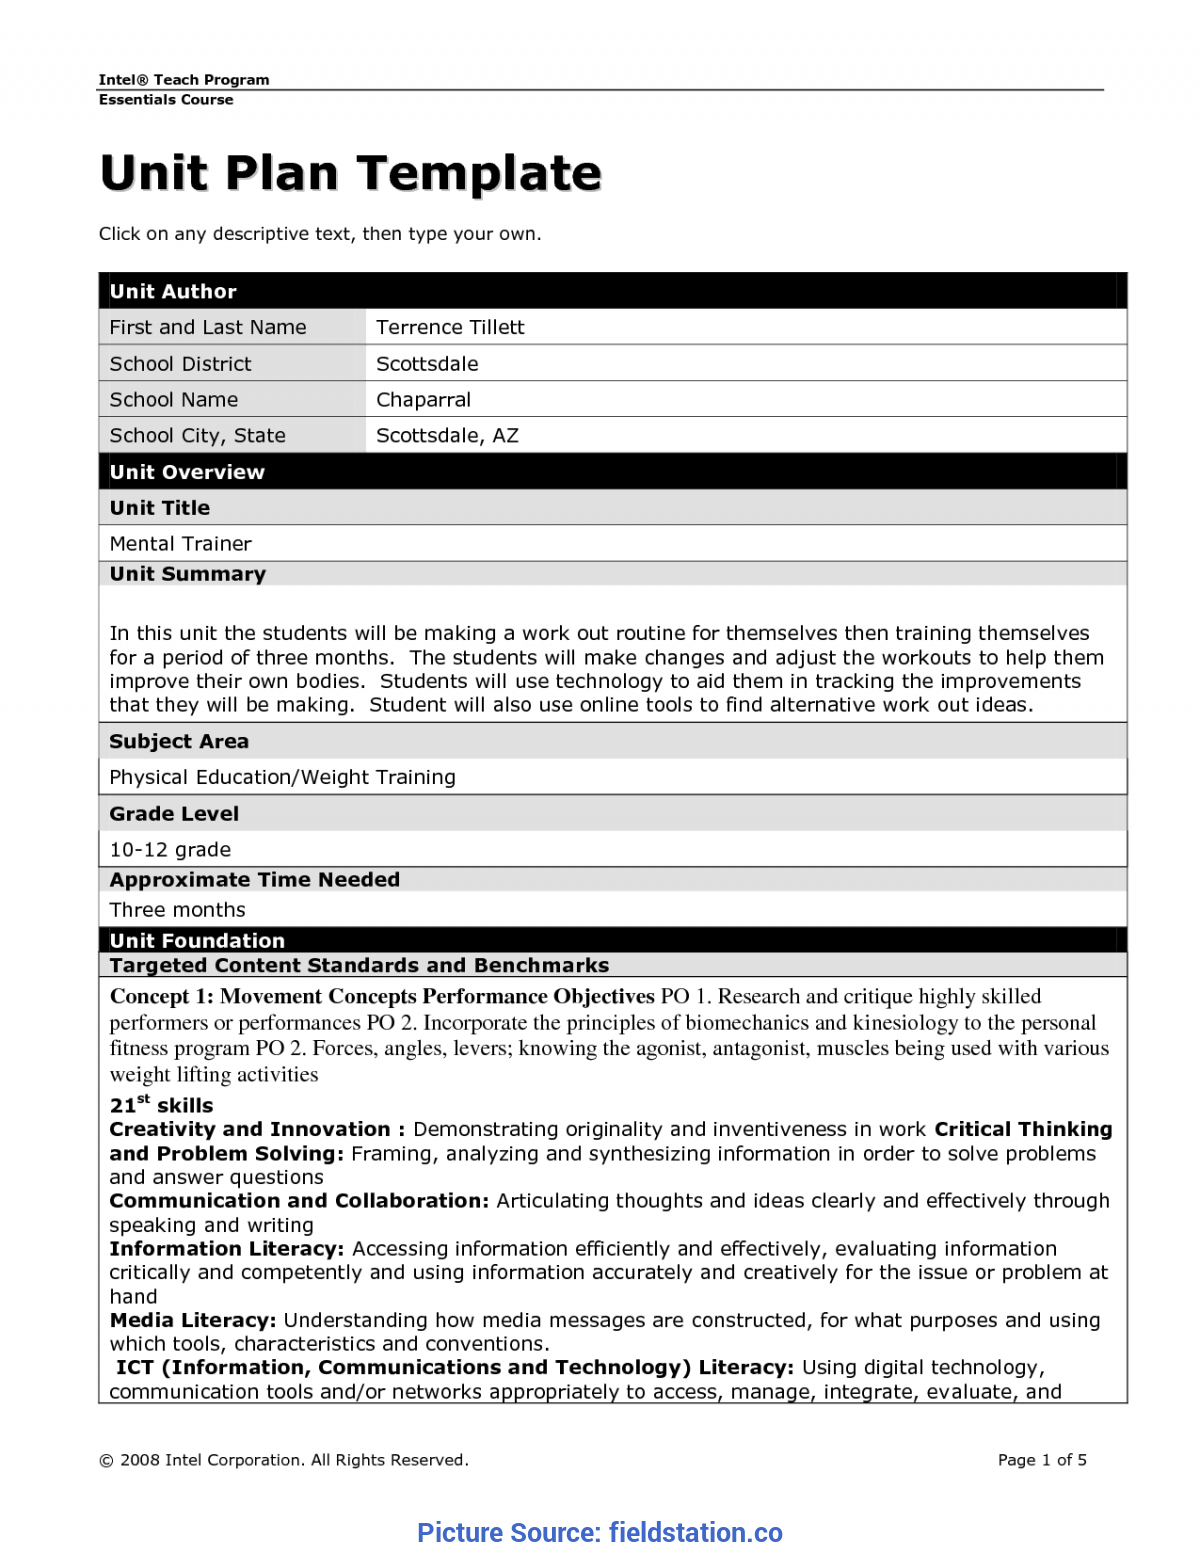 Newest Lesson Plan Template Ontario Blank Unit Lesson Plan Within Blank Unit Lesson Plan Template